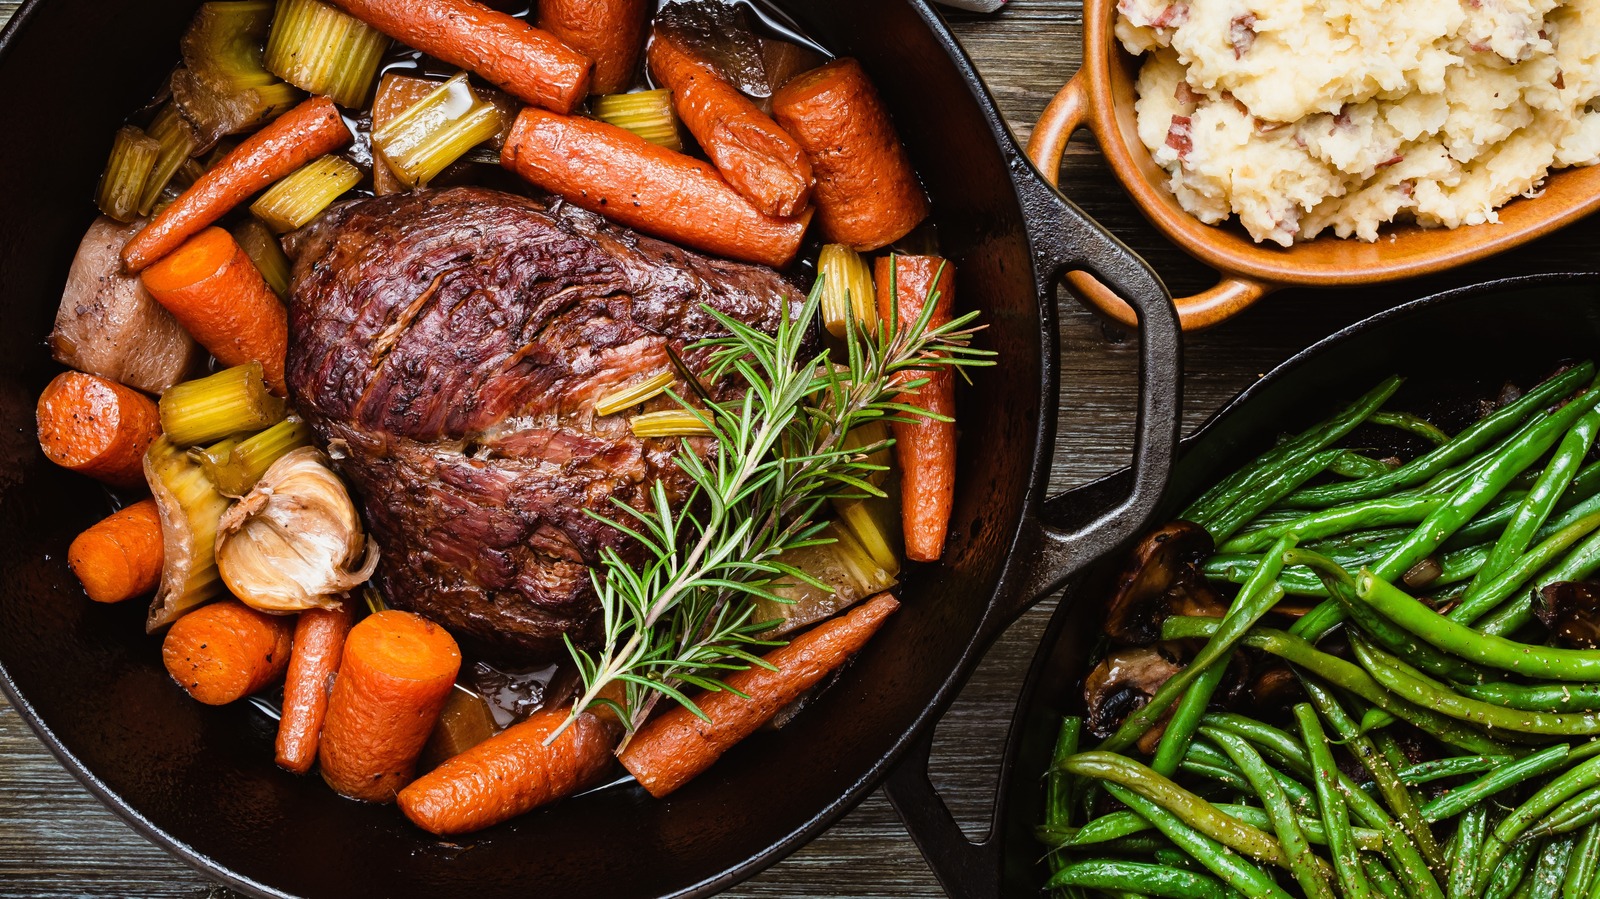 https://www.tastingtable.com/img/gallery/13-vegetables-you-should-be-cooking-with-pot-roast/l-intro-1691181020.jpg